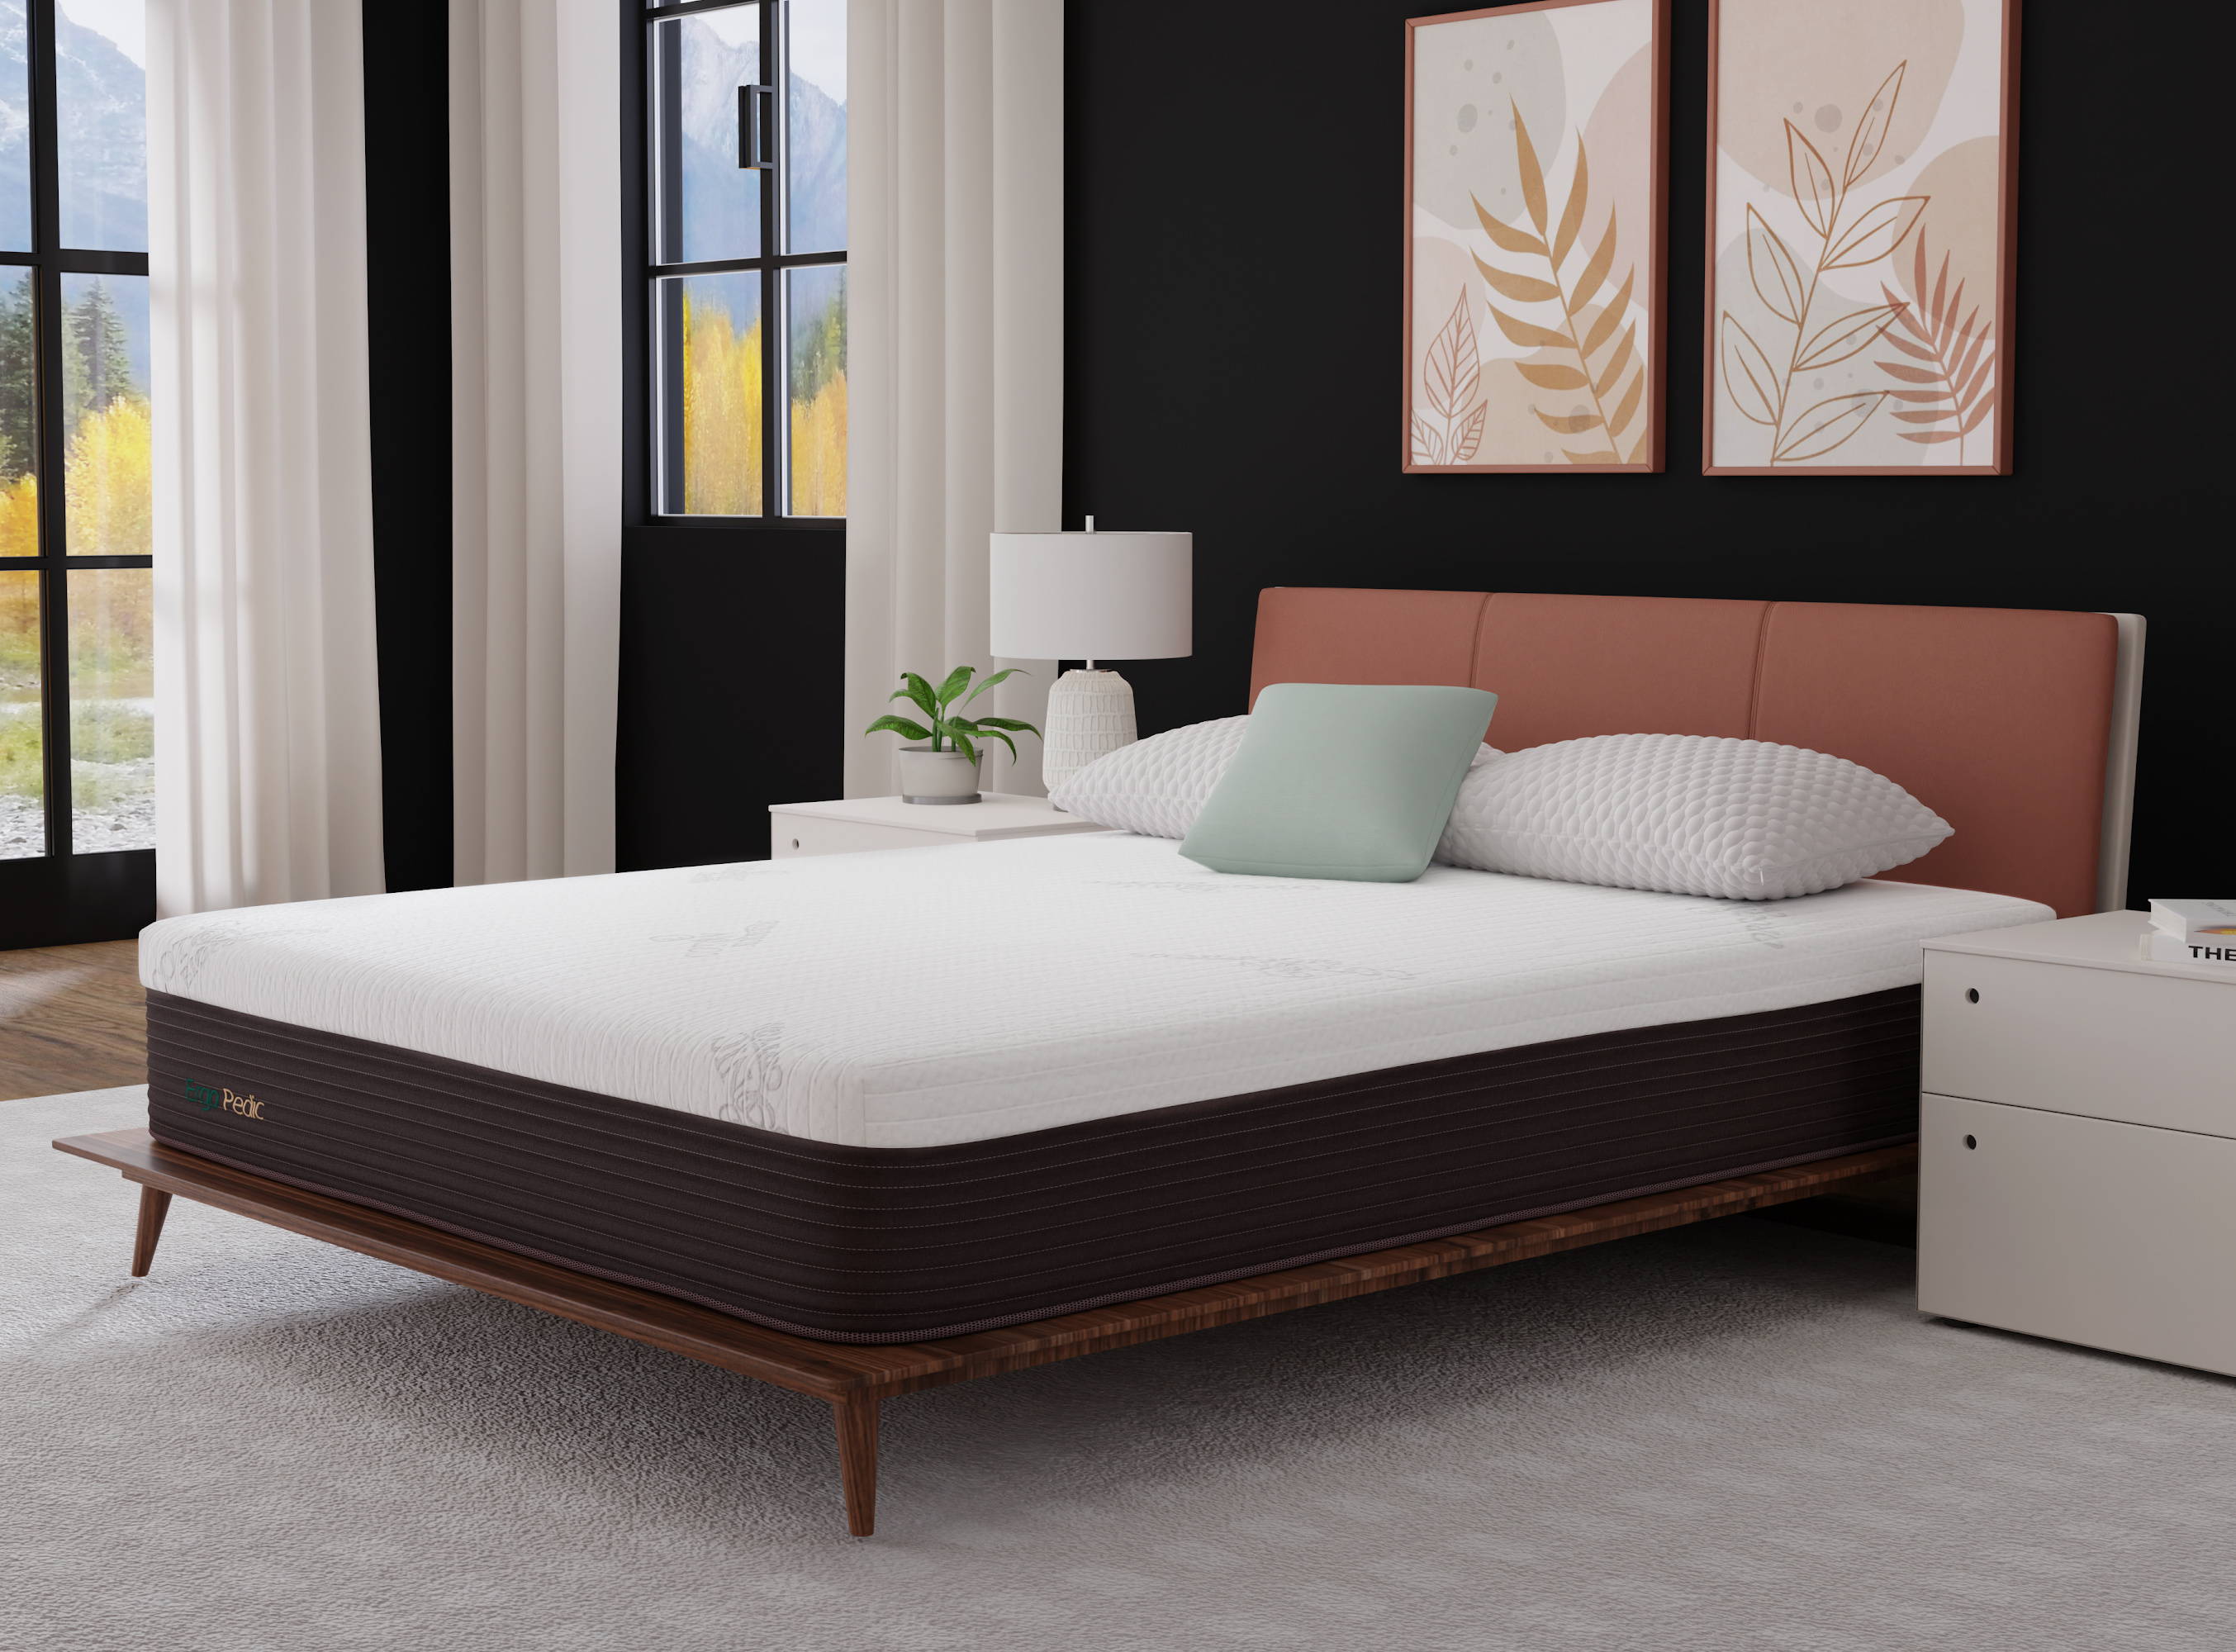 Cooling CopperCloud Original in a bedroom on a platform bed with charcoal walls.